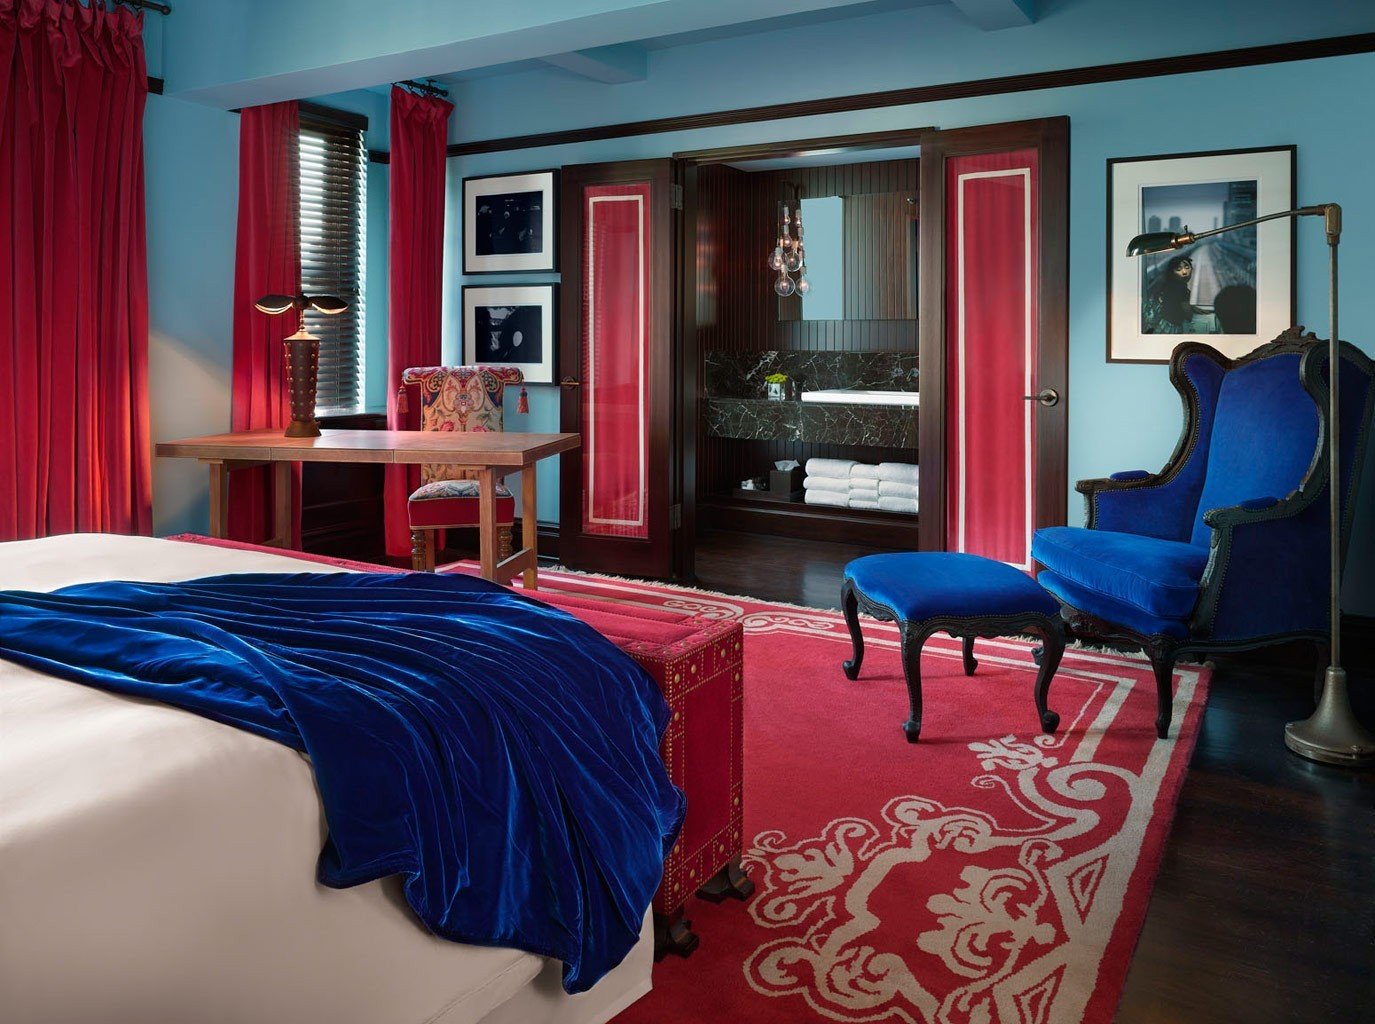 Hotels Offbeat indoor room wall floor red window bed property Living house Suite interior design furniture home living room Bedroom estate real estate cottage apartment blue decorated area bright colorful